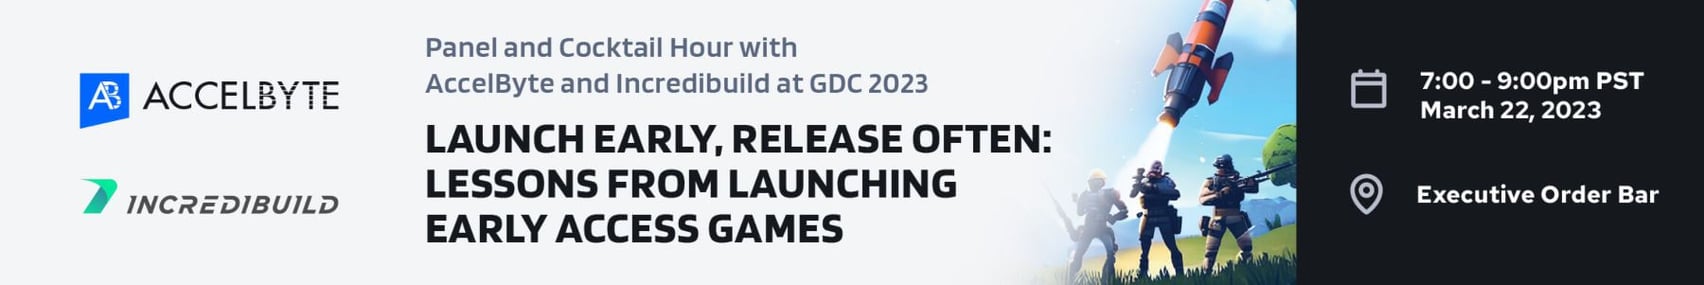 Banner for Launch Early, Release Often: Lessons from Launching Early Access Games